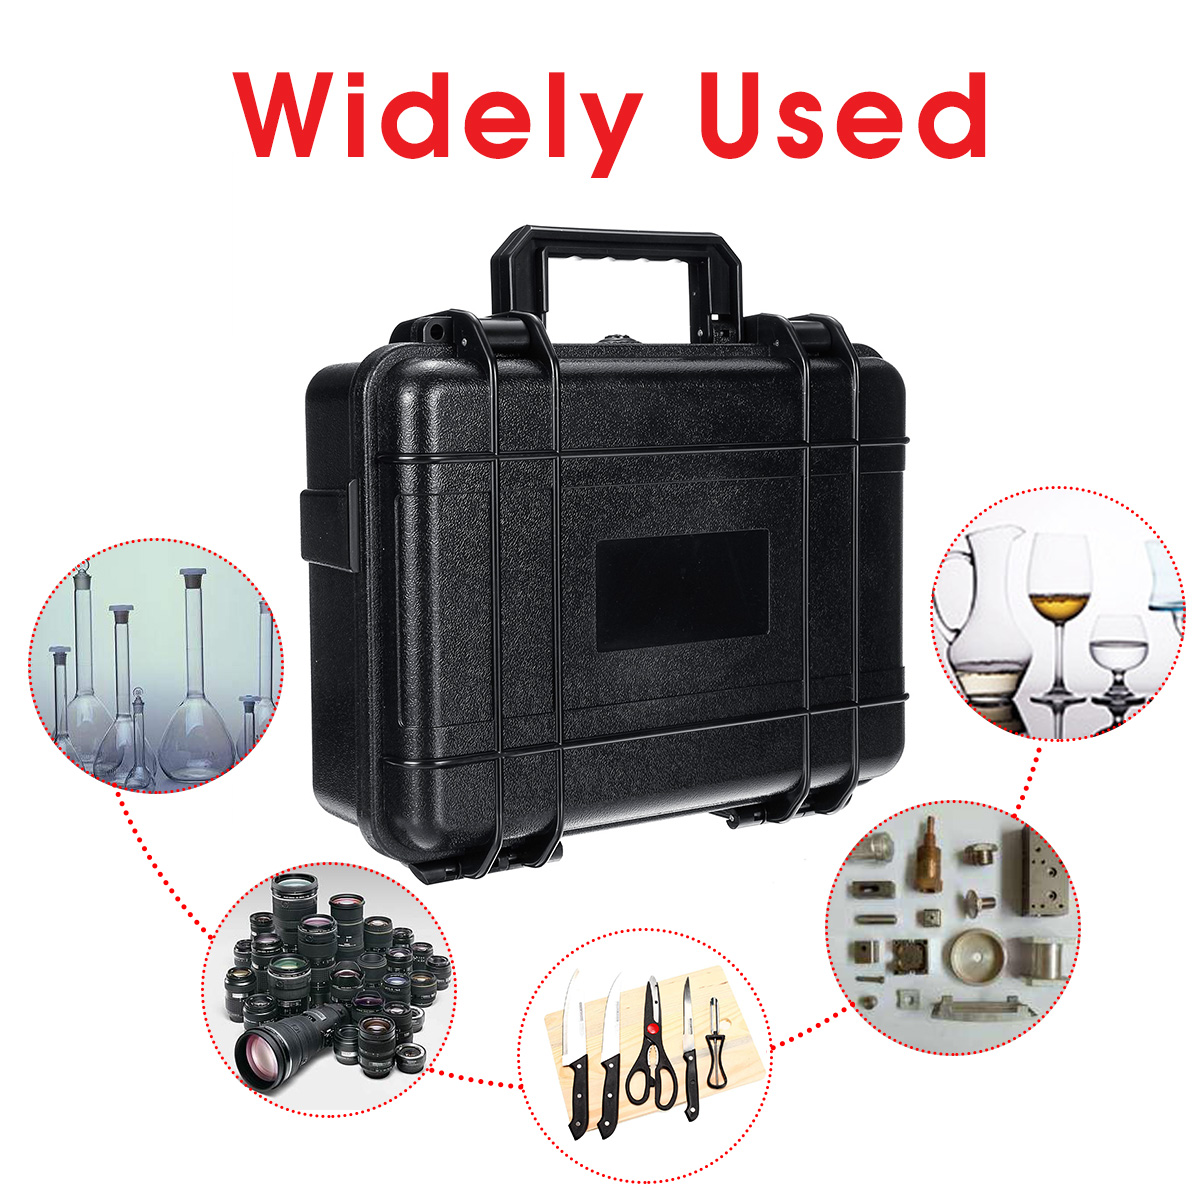 Outdoor-Portable-EDC-Instrument-Tool-Kits-Box-Waterproof-Shockproof-Protective-Safety-Storage-Case-1553948-10